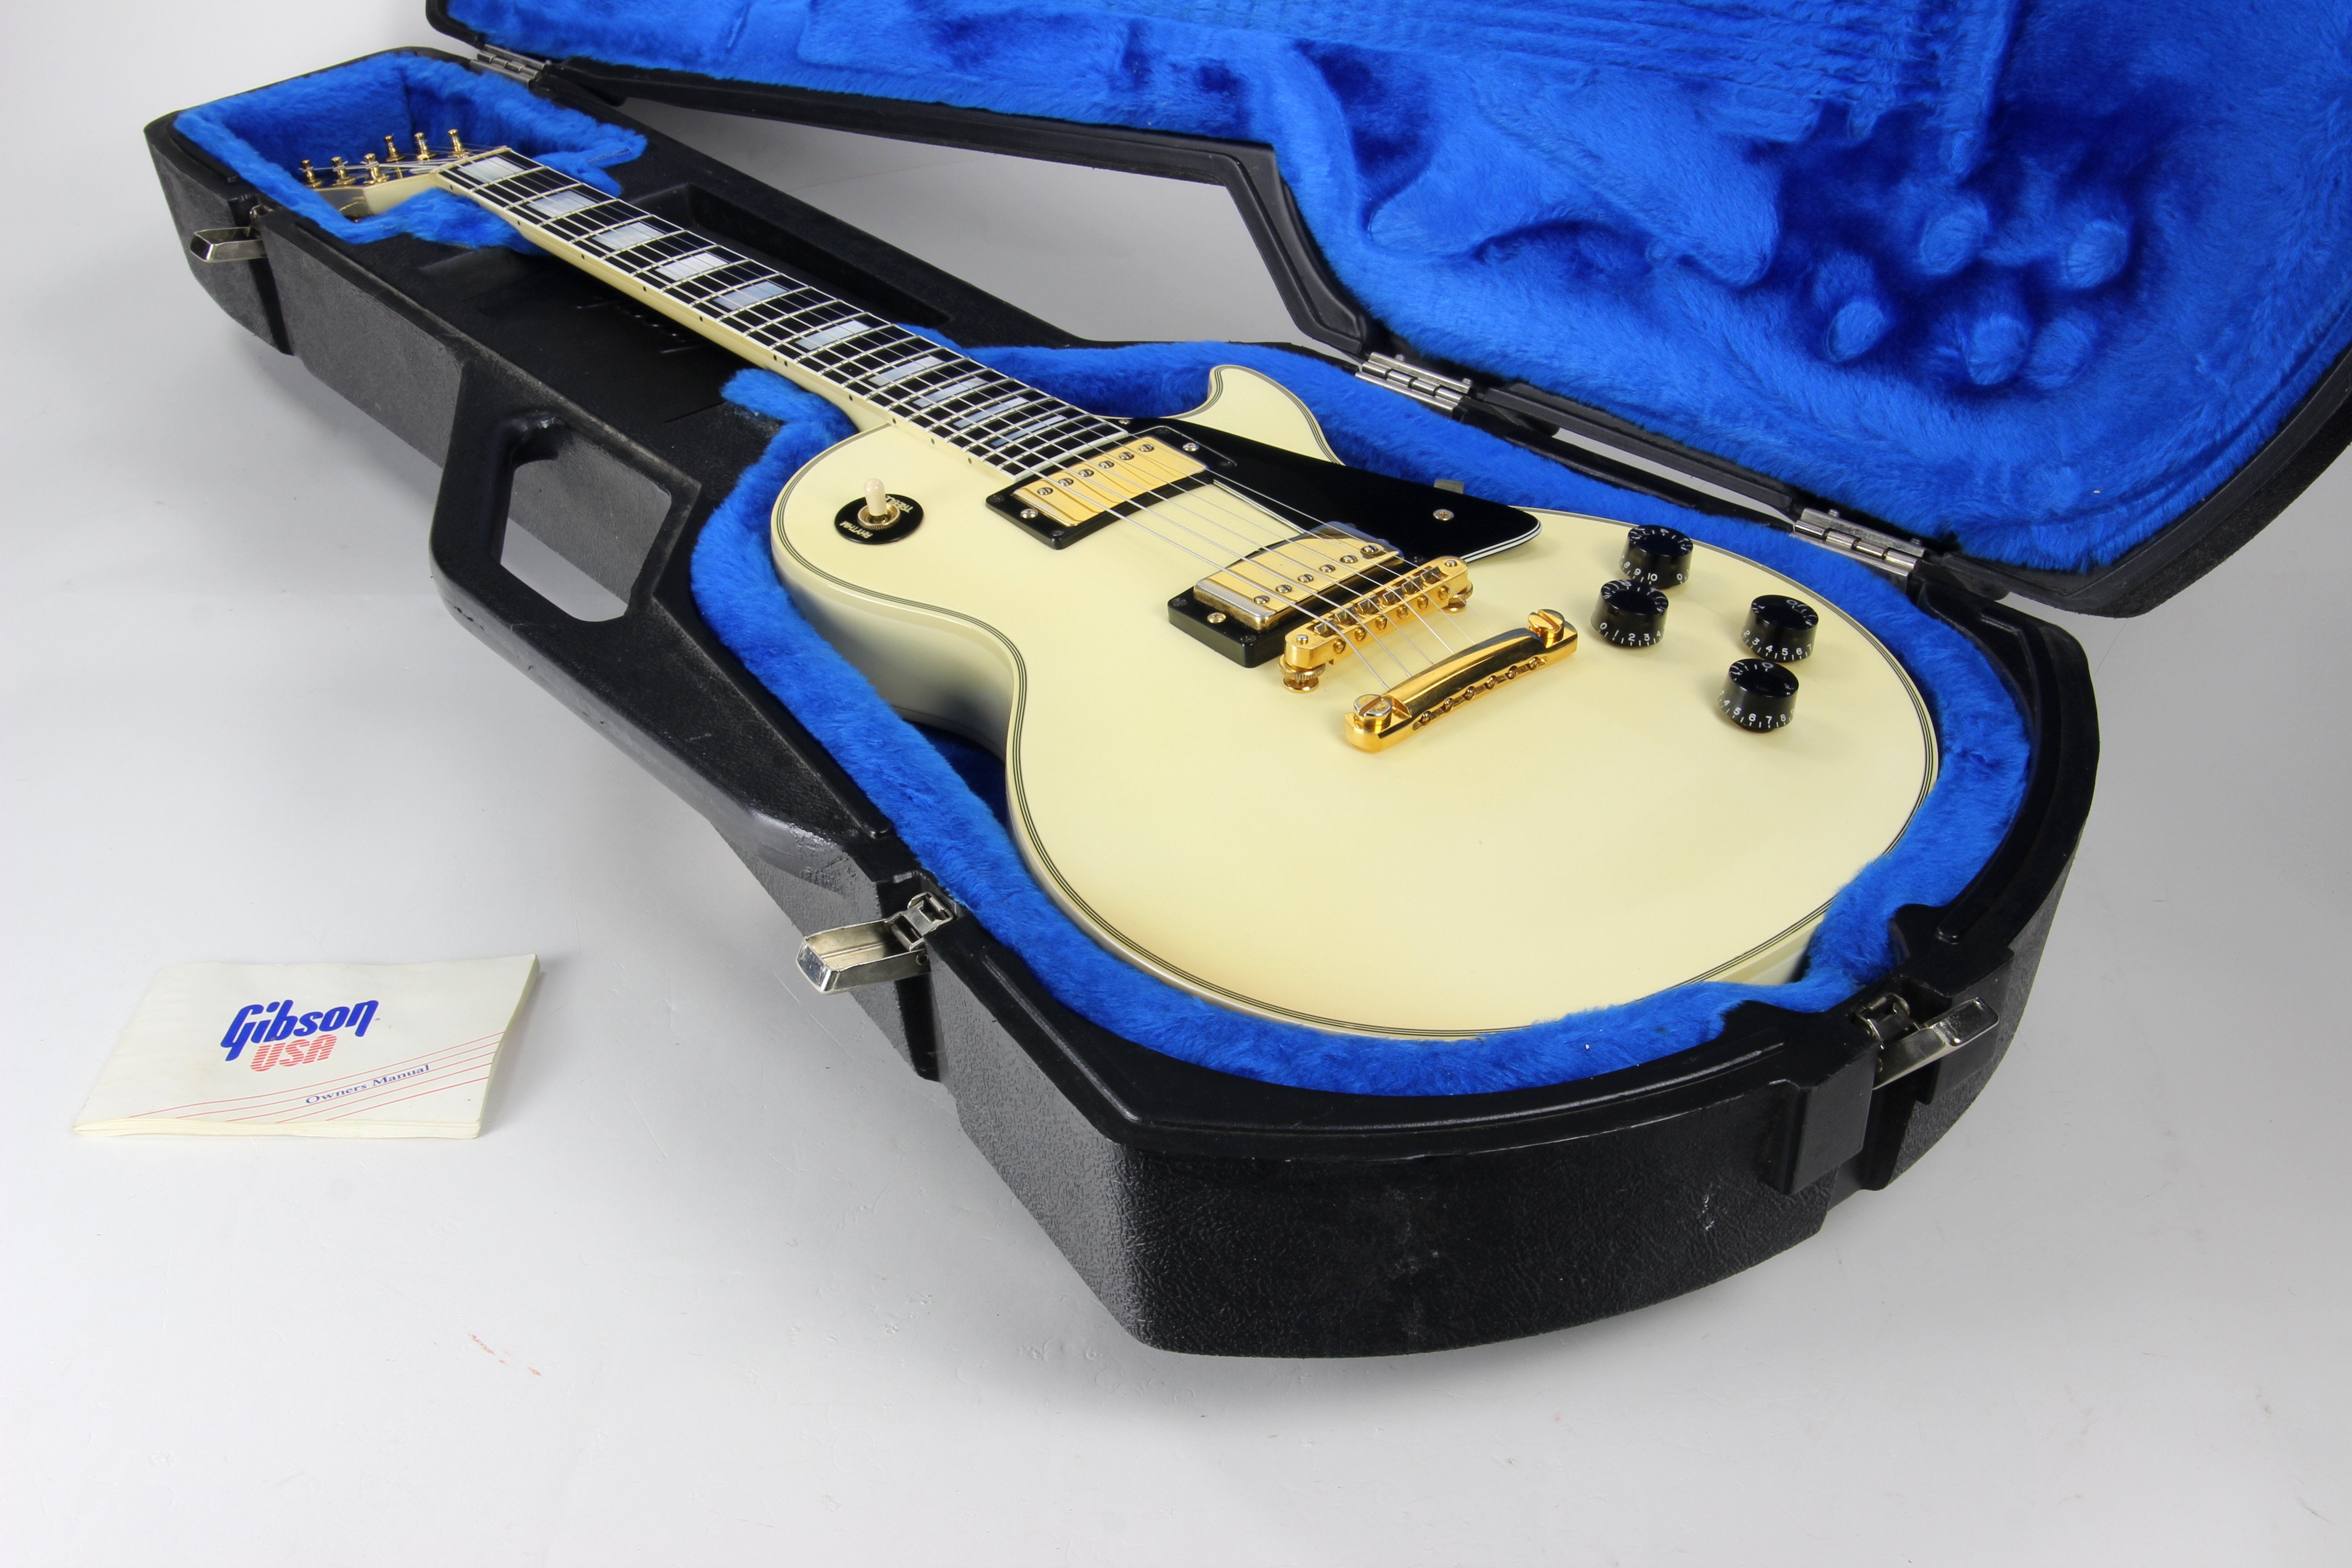 *SOLD*  1989 Gibson Les Paul Custom White - Ebony Fingerboard, Original Protector Chainsaw Case, Owner's Manual! Vintage 1980's